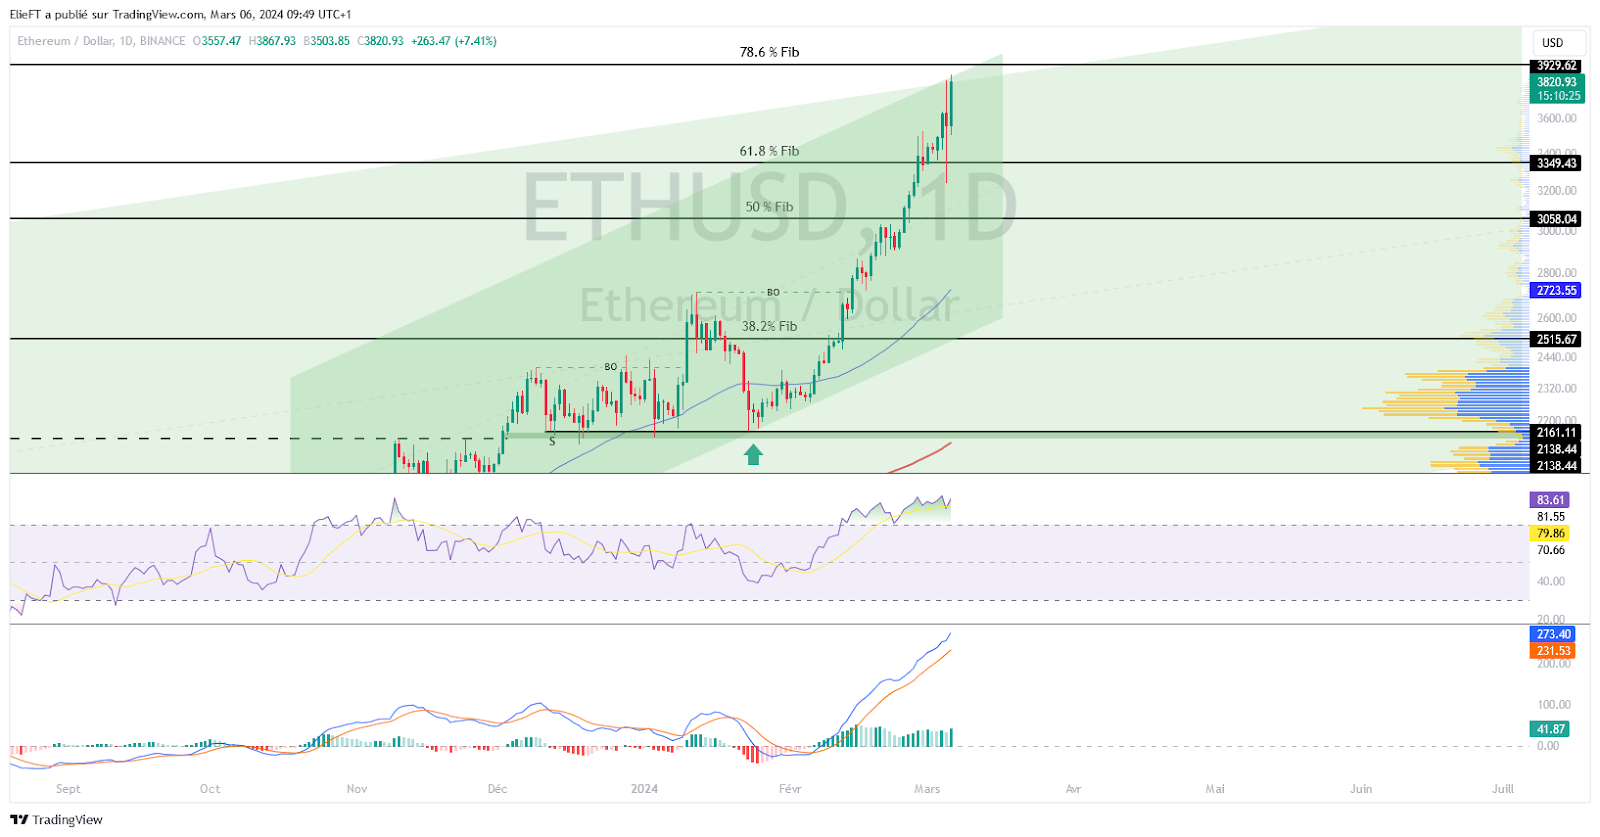 Daily chart of ETH/USD 